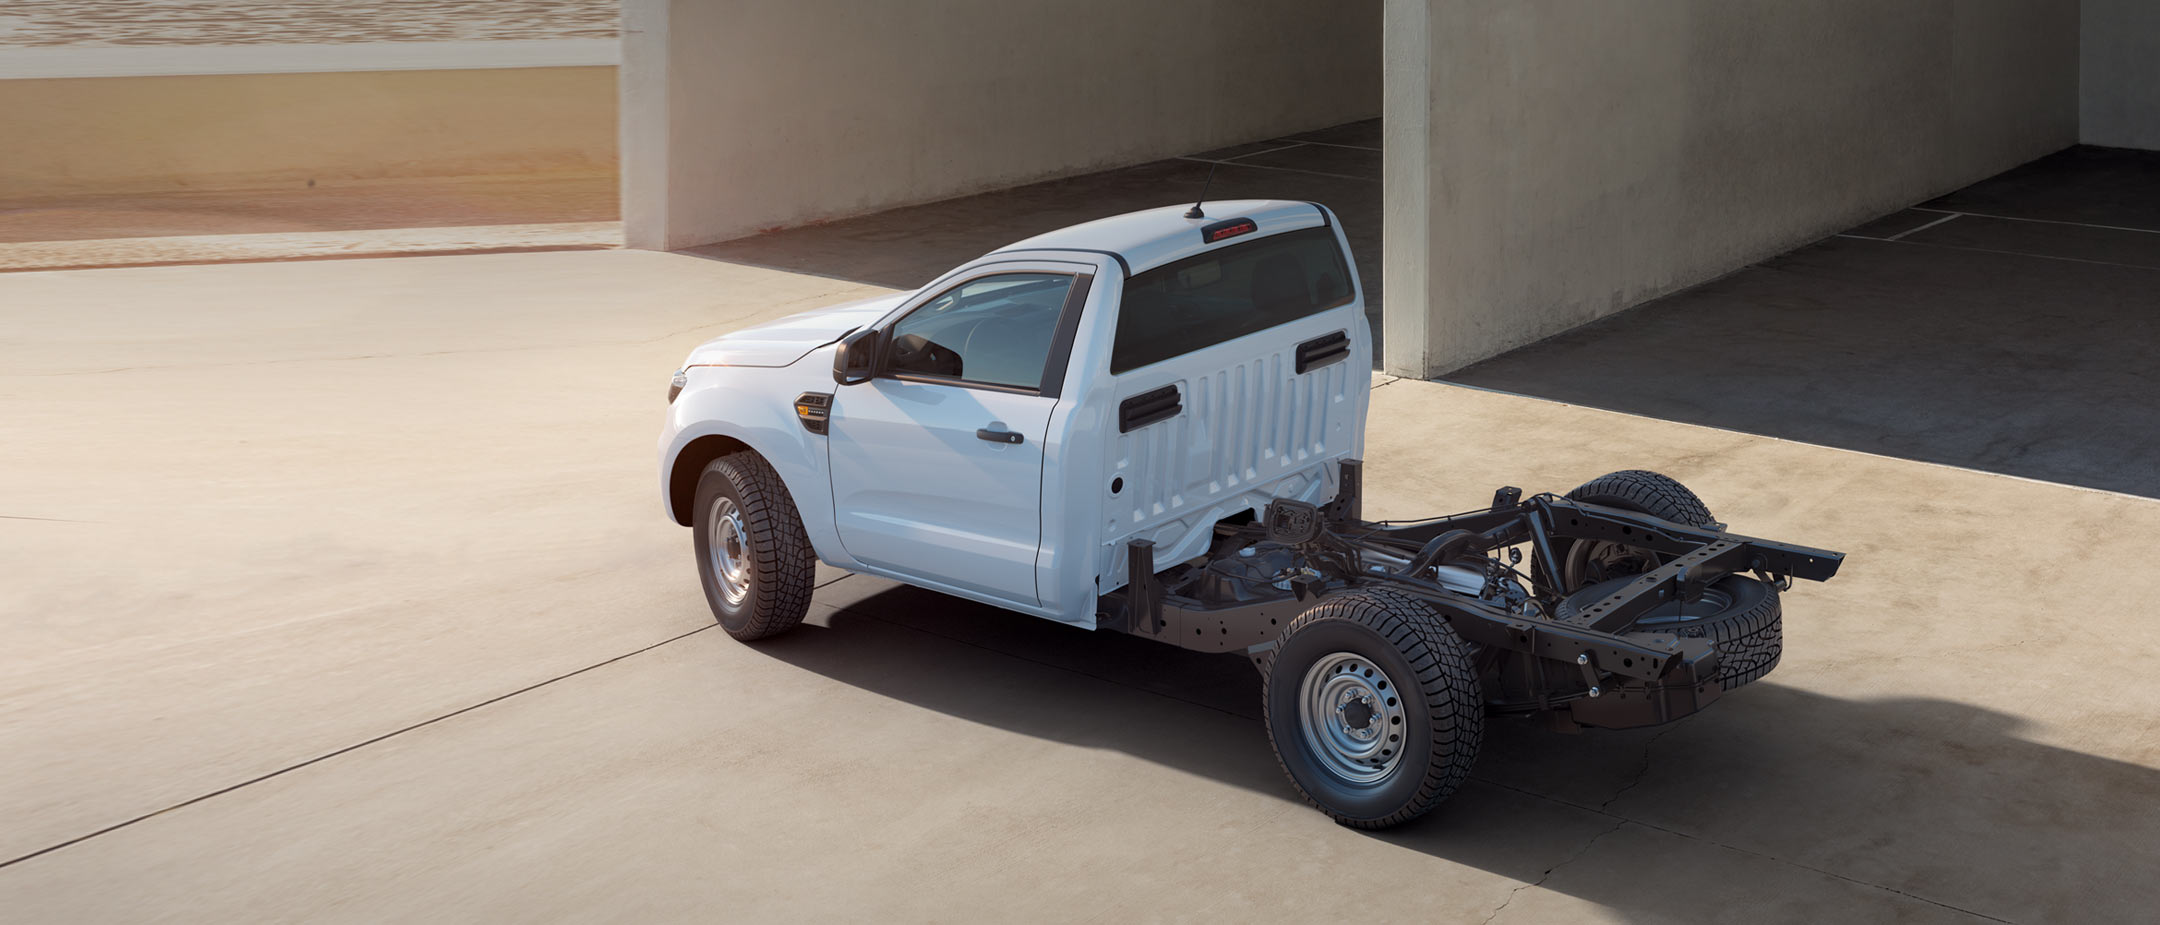 Ford Ranger Chassis Cab in a hall made of concrete